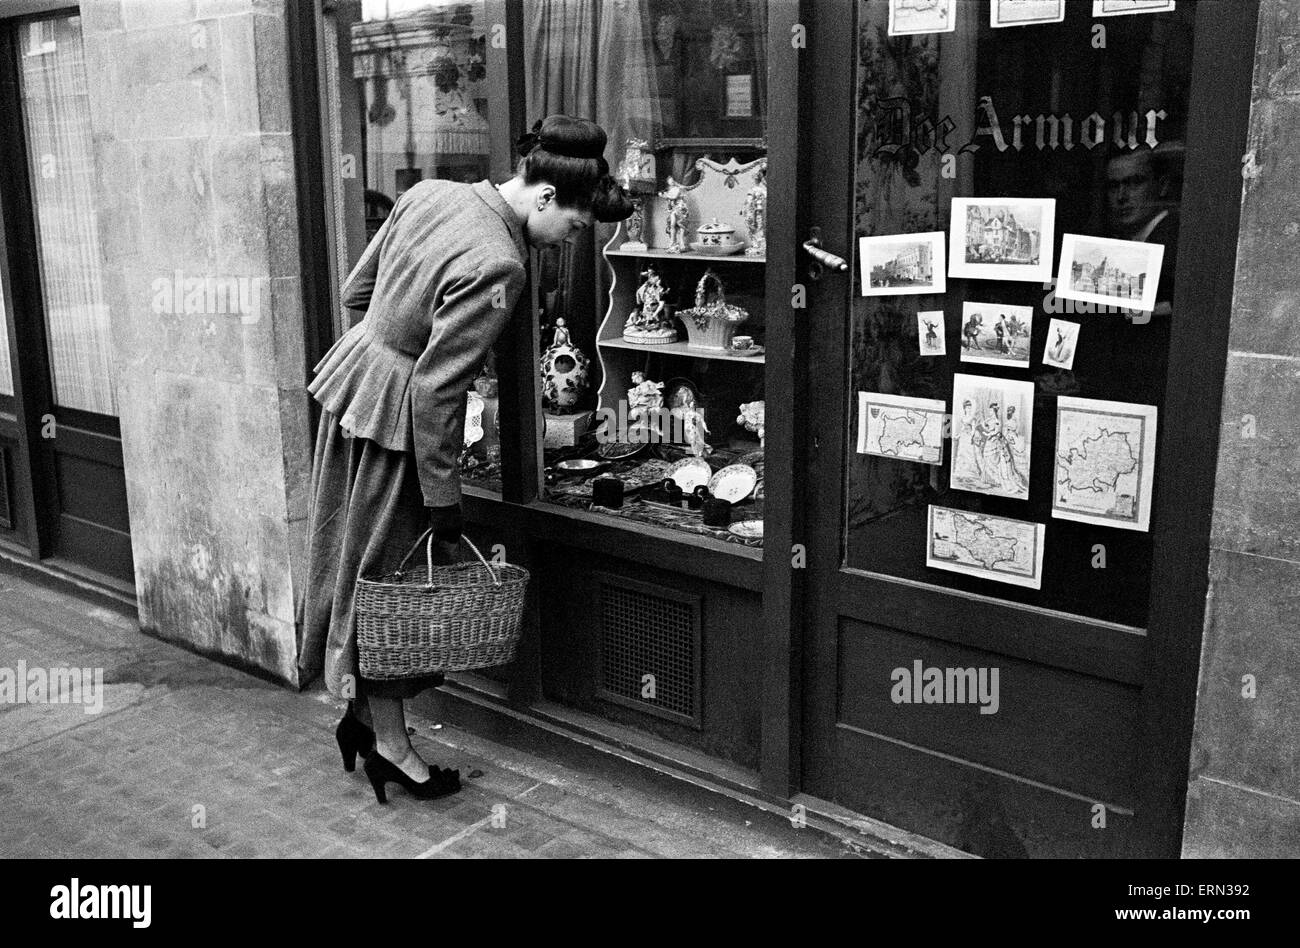 Day in the Life of Shepherds Market circa 1948 Local resident window shopping at No 13 Shepherds market Stock Photo